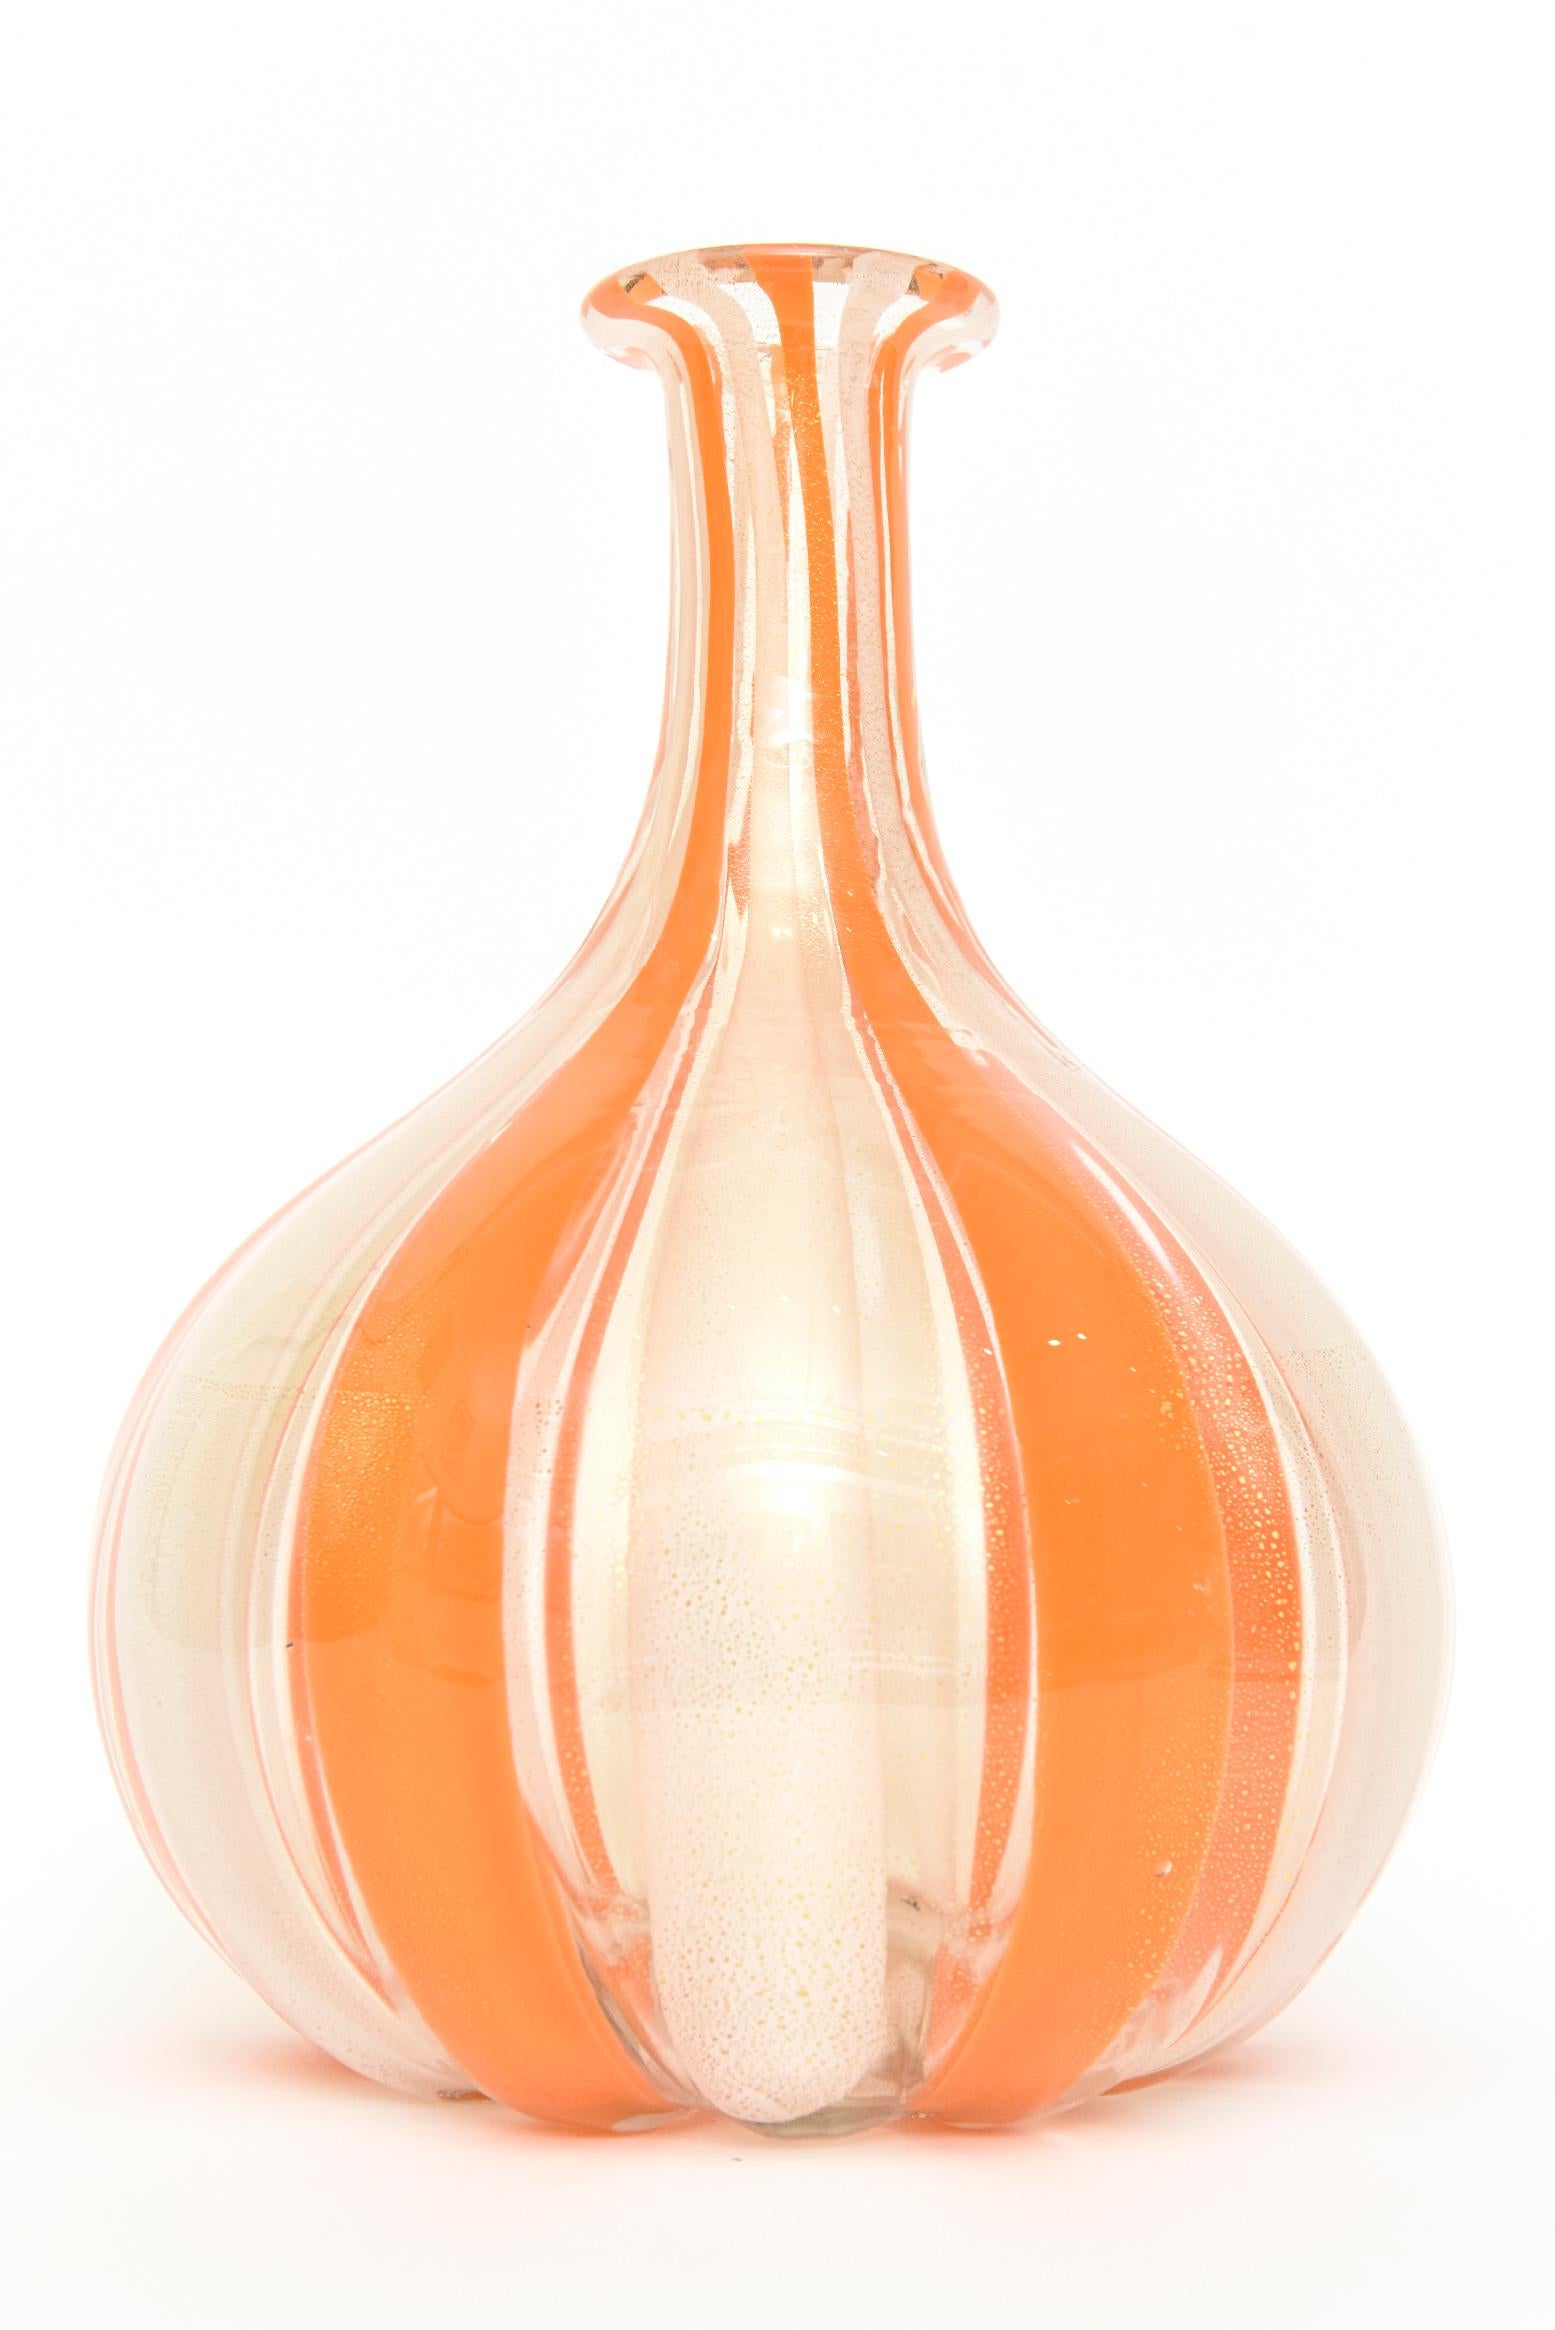 This very heavy and very fabulous bulbous Italian murano Mid-Century Modern striped orange, white and interspersed gold aventurine vase, vessel or bottle is the work of Alfredo Barbini. The original sticker came off in the washing of it to get it